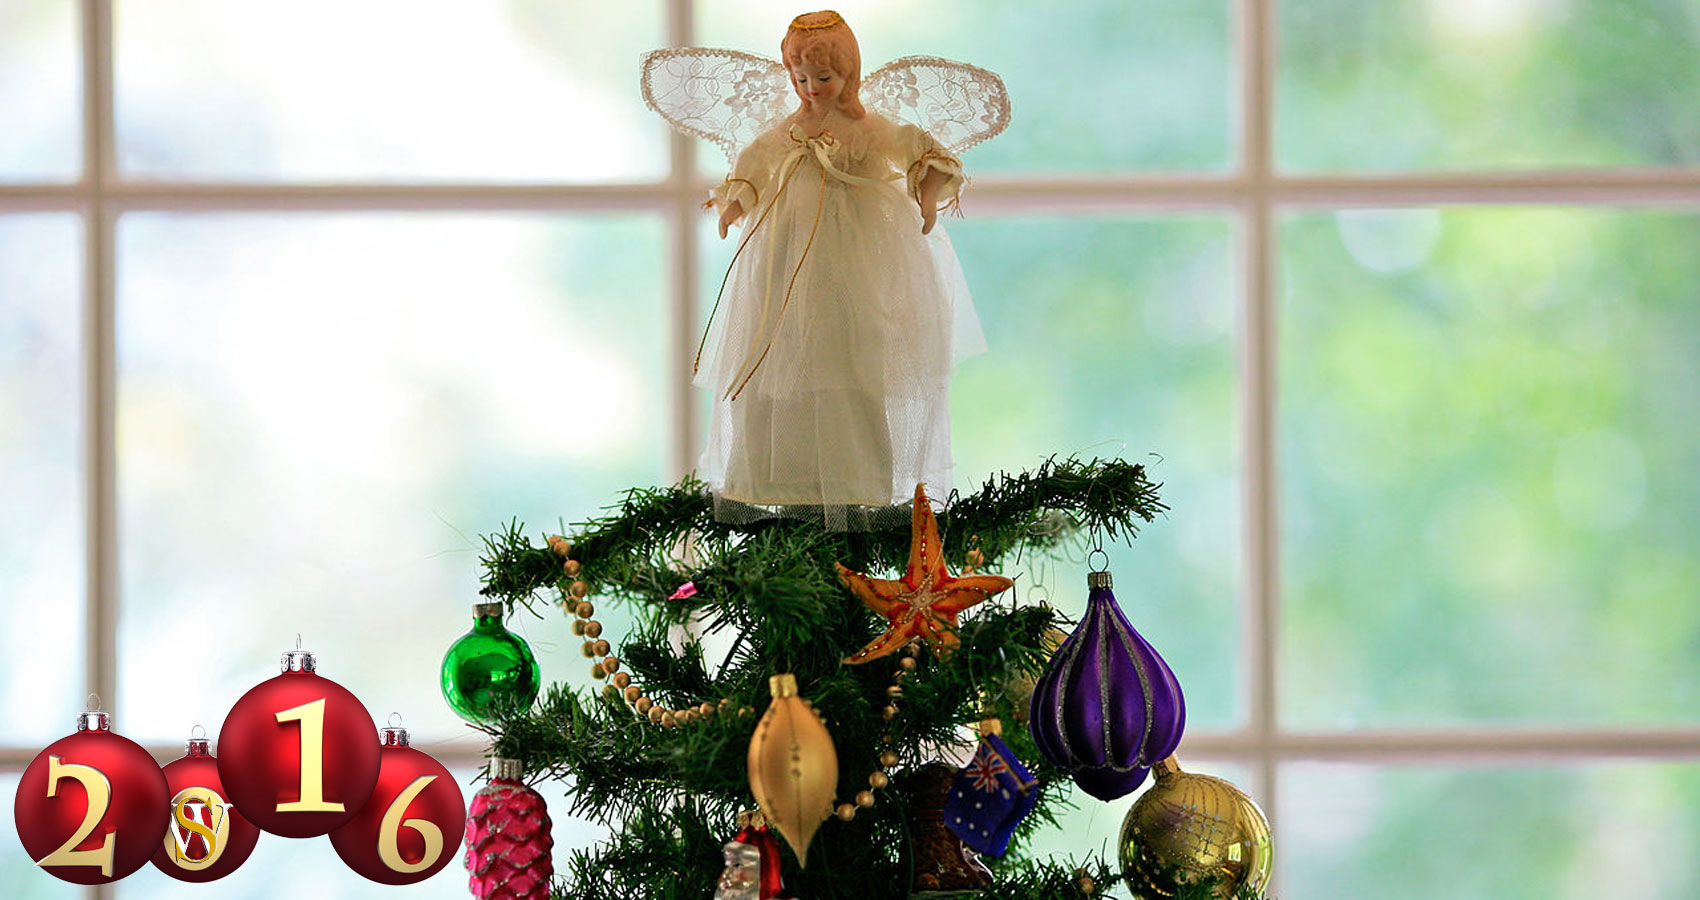 Fairy Mary's Christmas Tree by Nobby66 at Spillwords.com